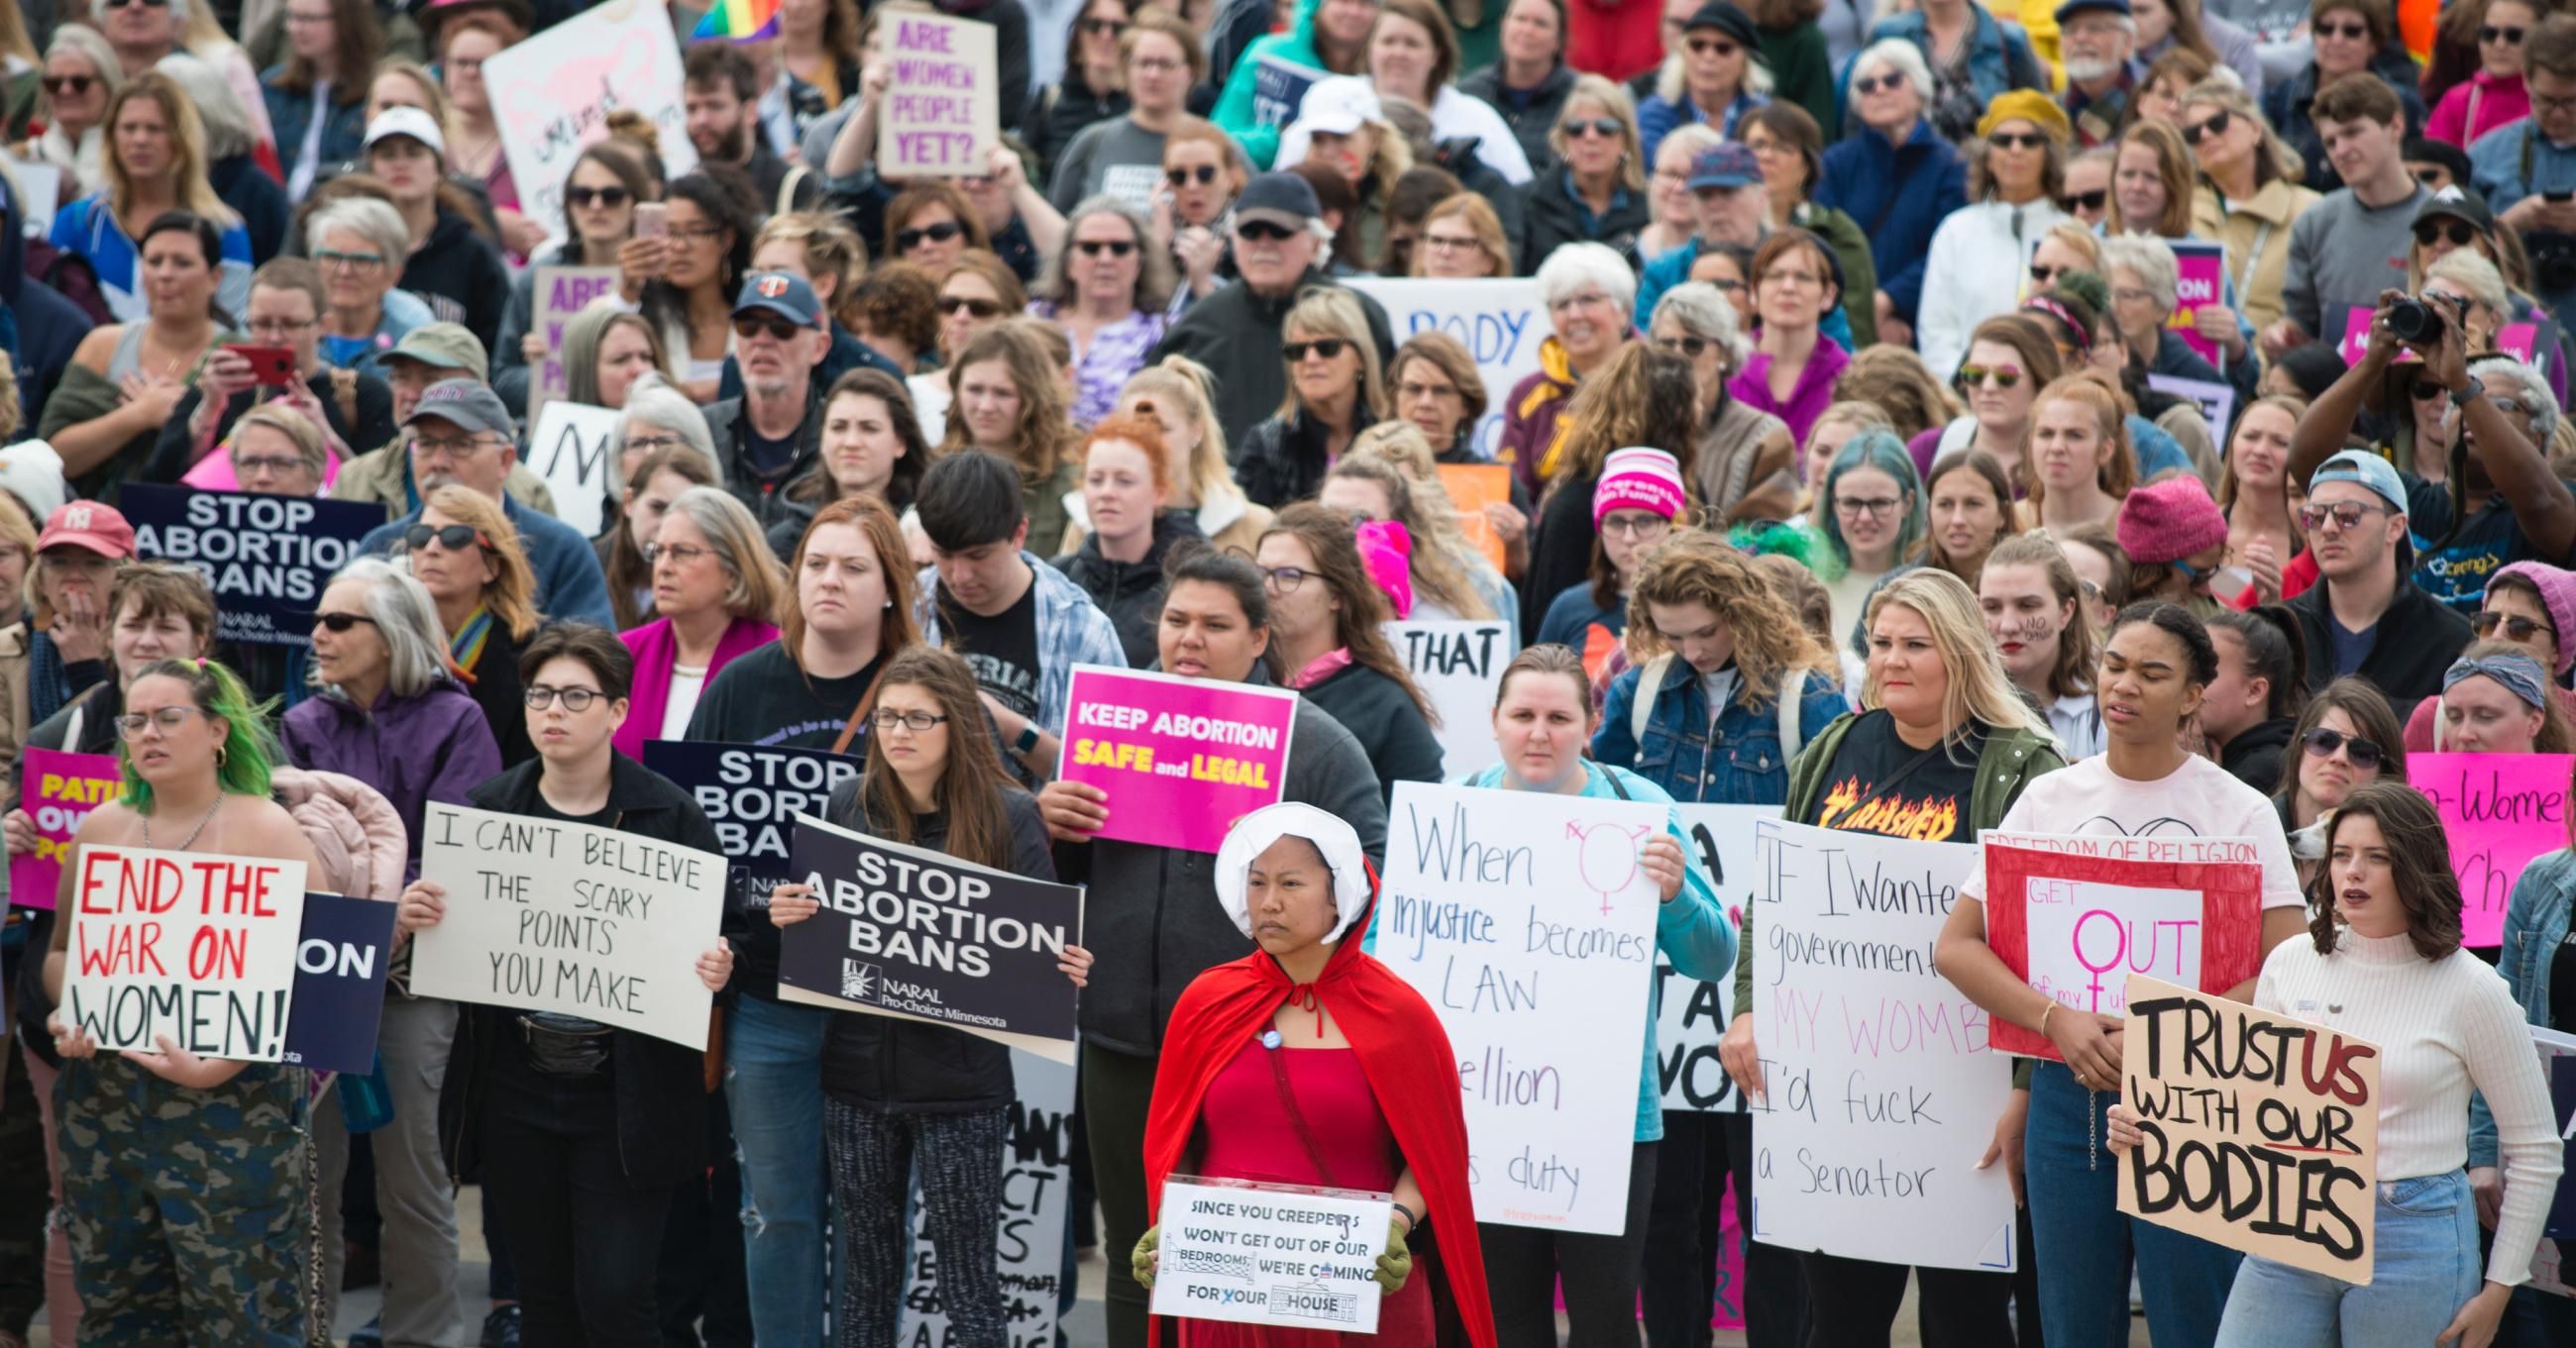 Reproductive rights advocates demonstrate at a May 21, 2019 pro-choice rally at the Minnesota State Capitol in St. Paul. (Photo: Fibonacci Blue/Flick Creative Commons) 